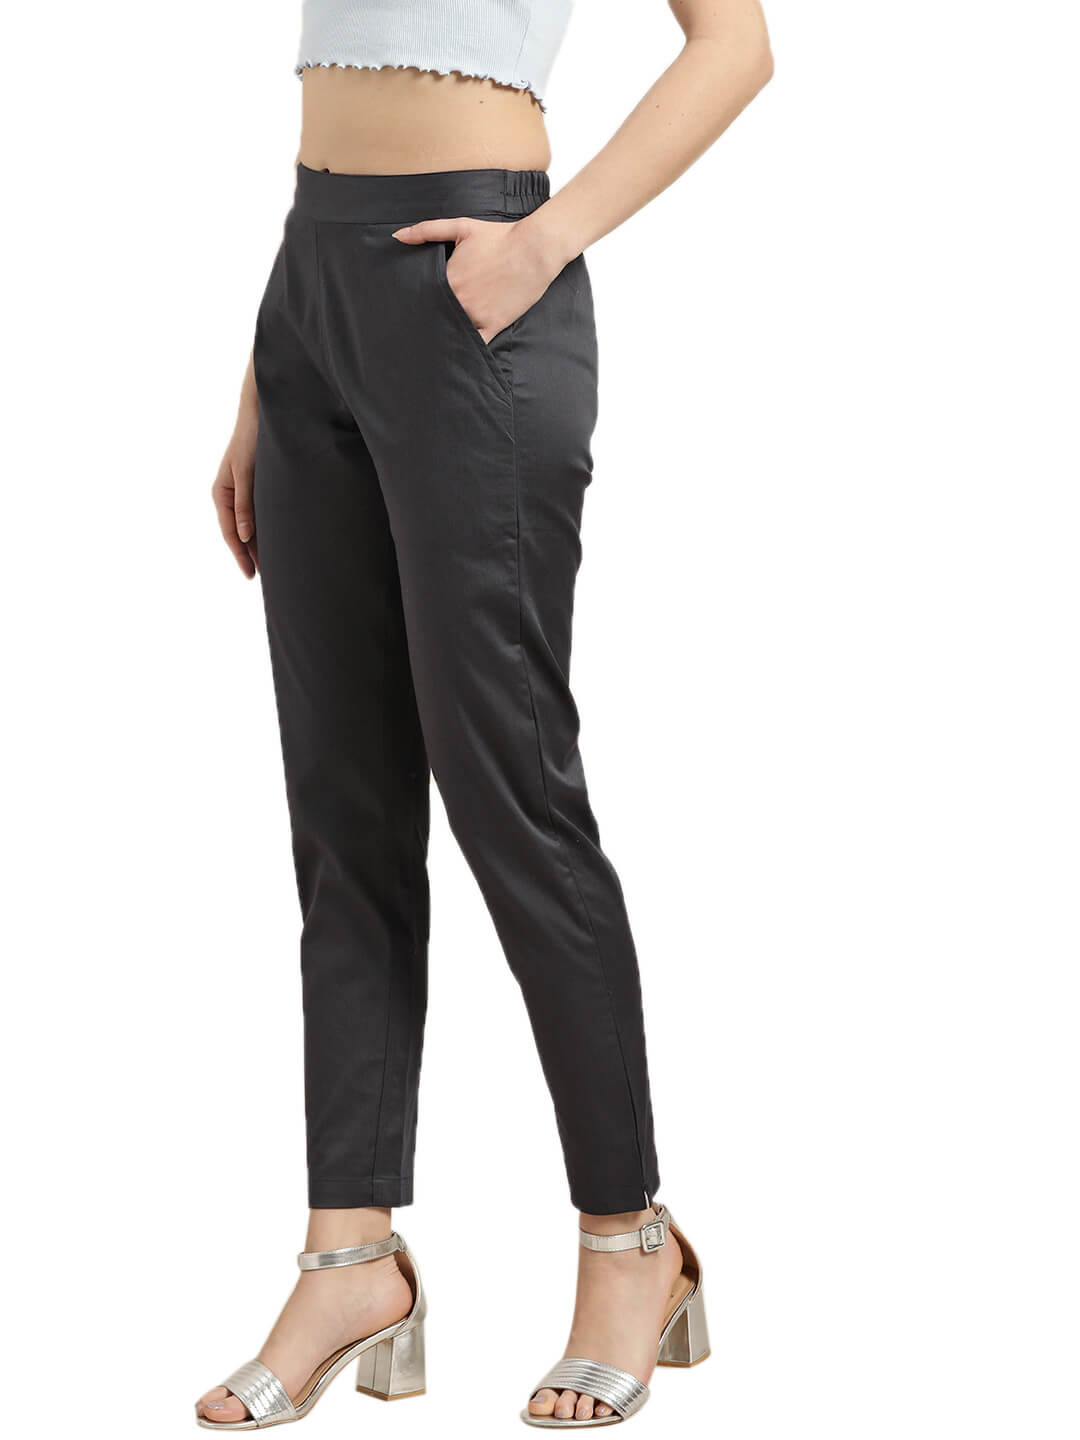 Bottom Wear Cotton Lycra Pant, Age: Anyone at Rs 45/piece in New Delhi |  ID: 21599402791